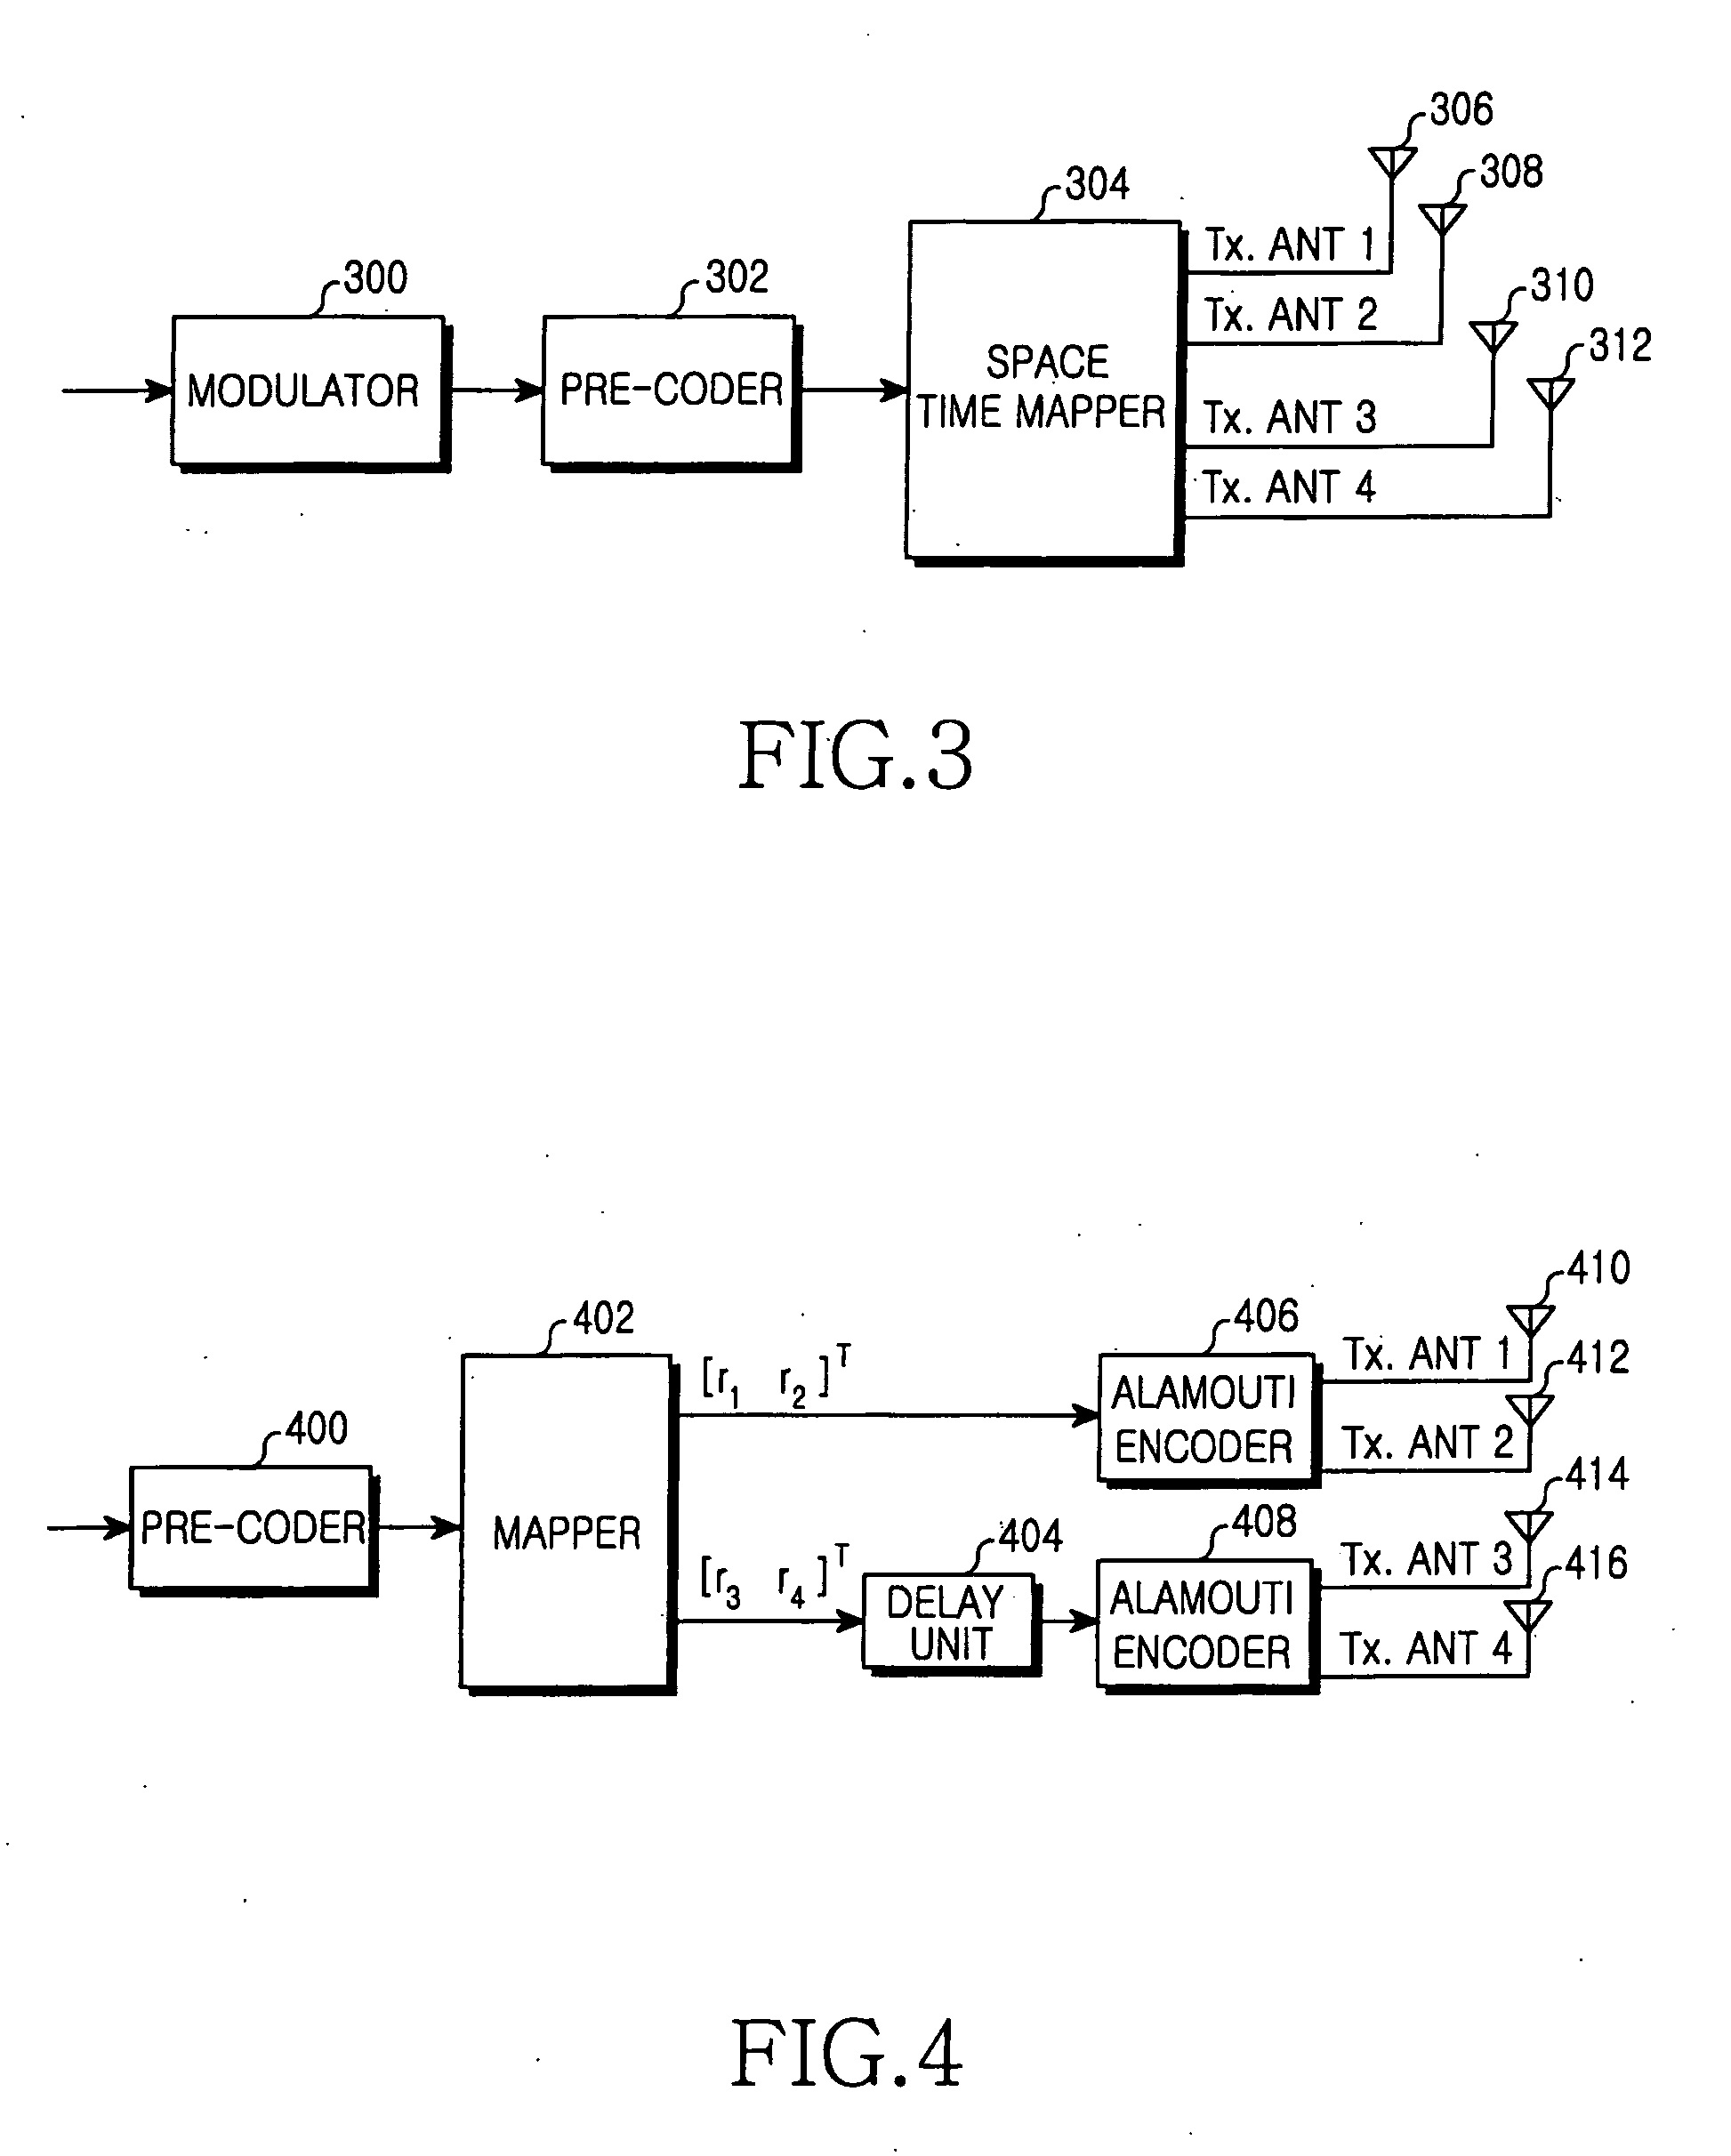 Apparatus and method for encoding/decoding space tine block code in a mobile communication system using multiple input multiple output scheme